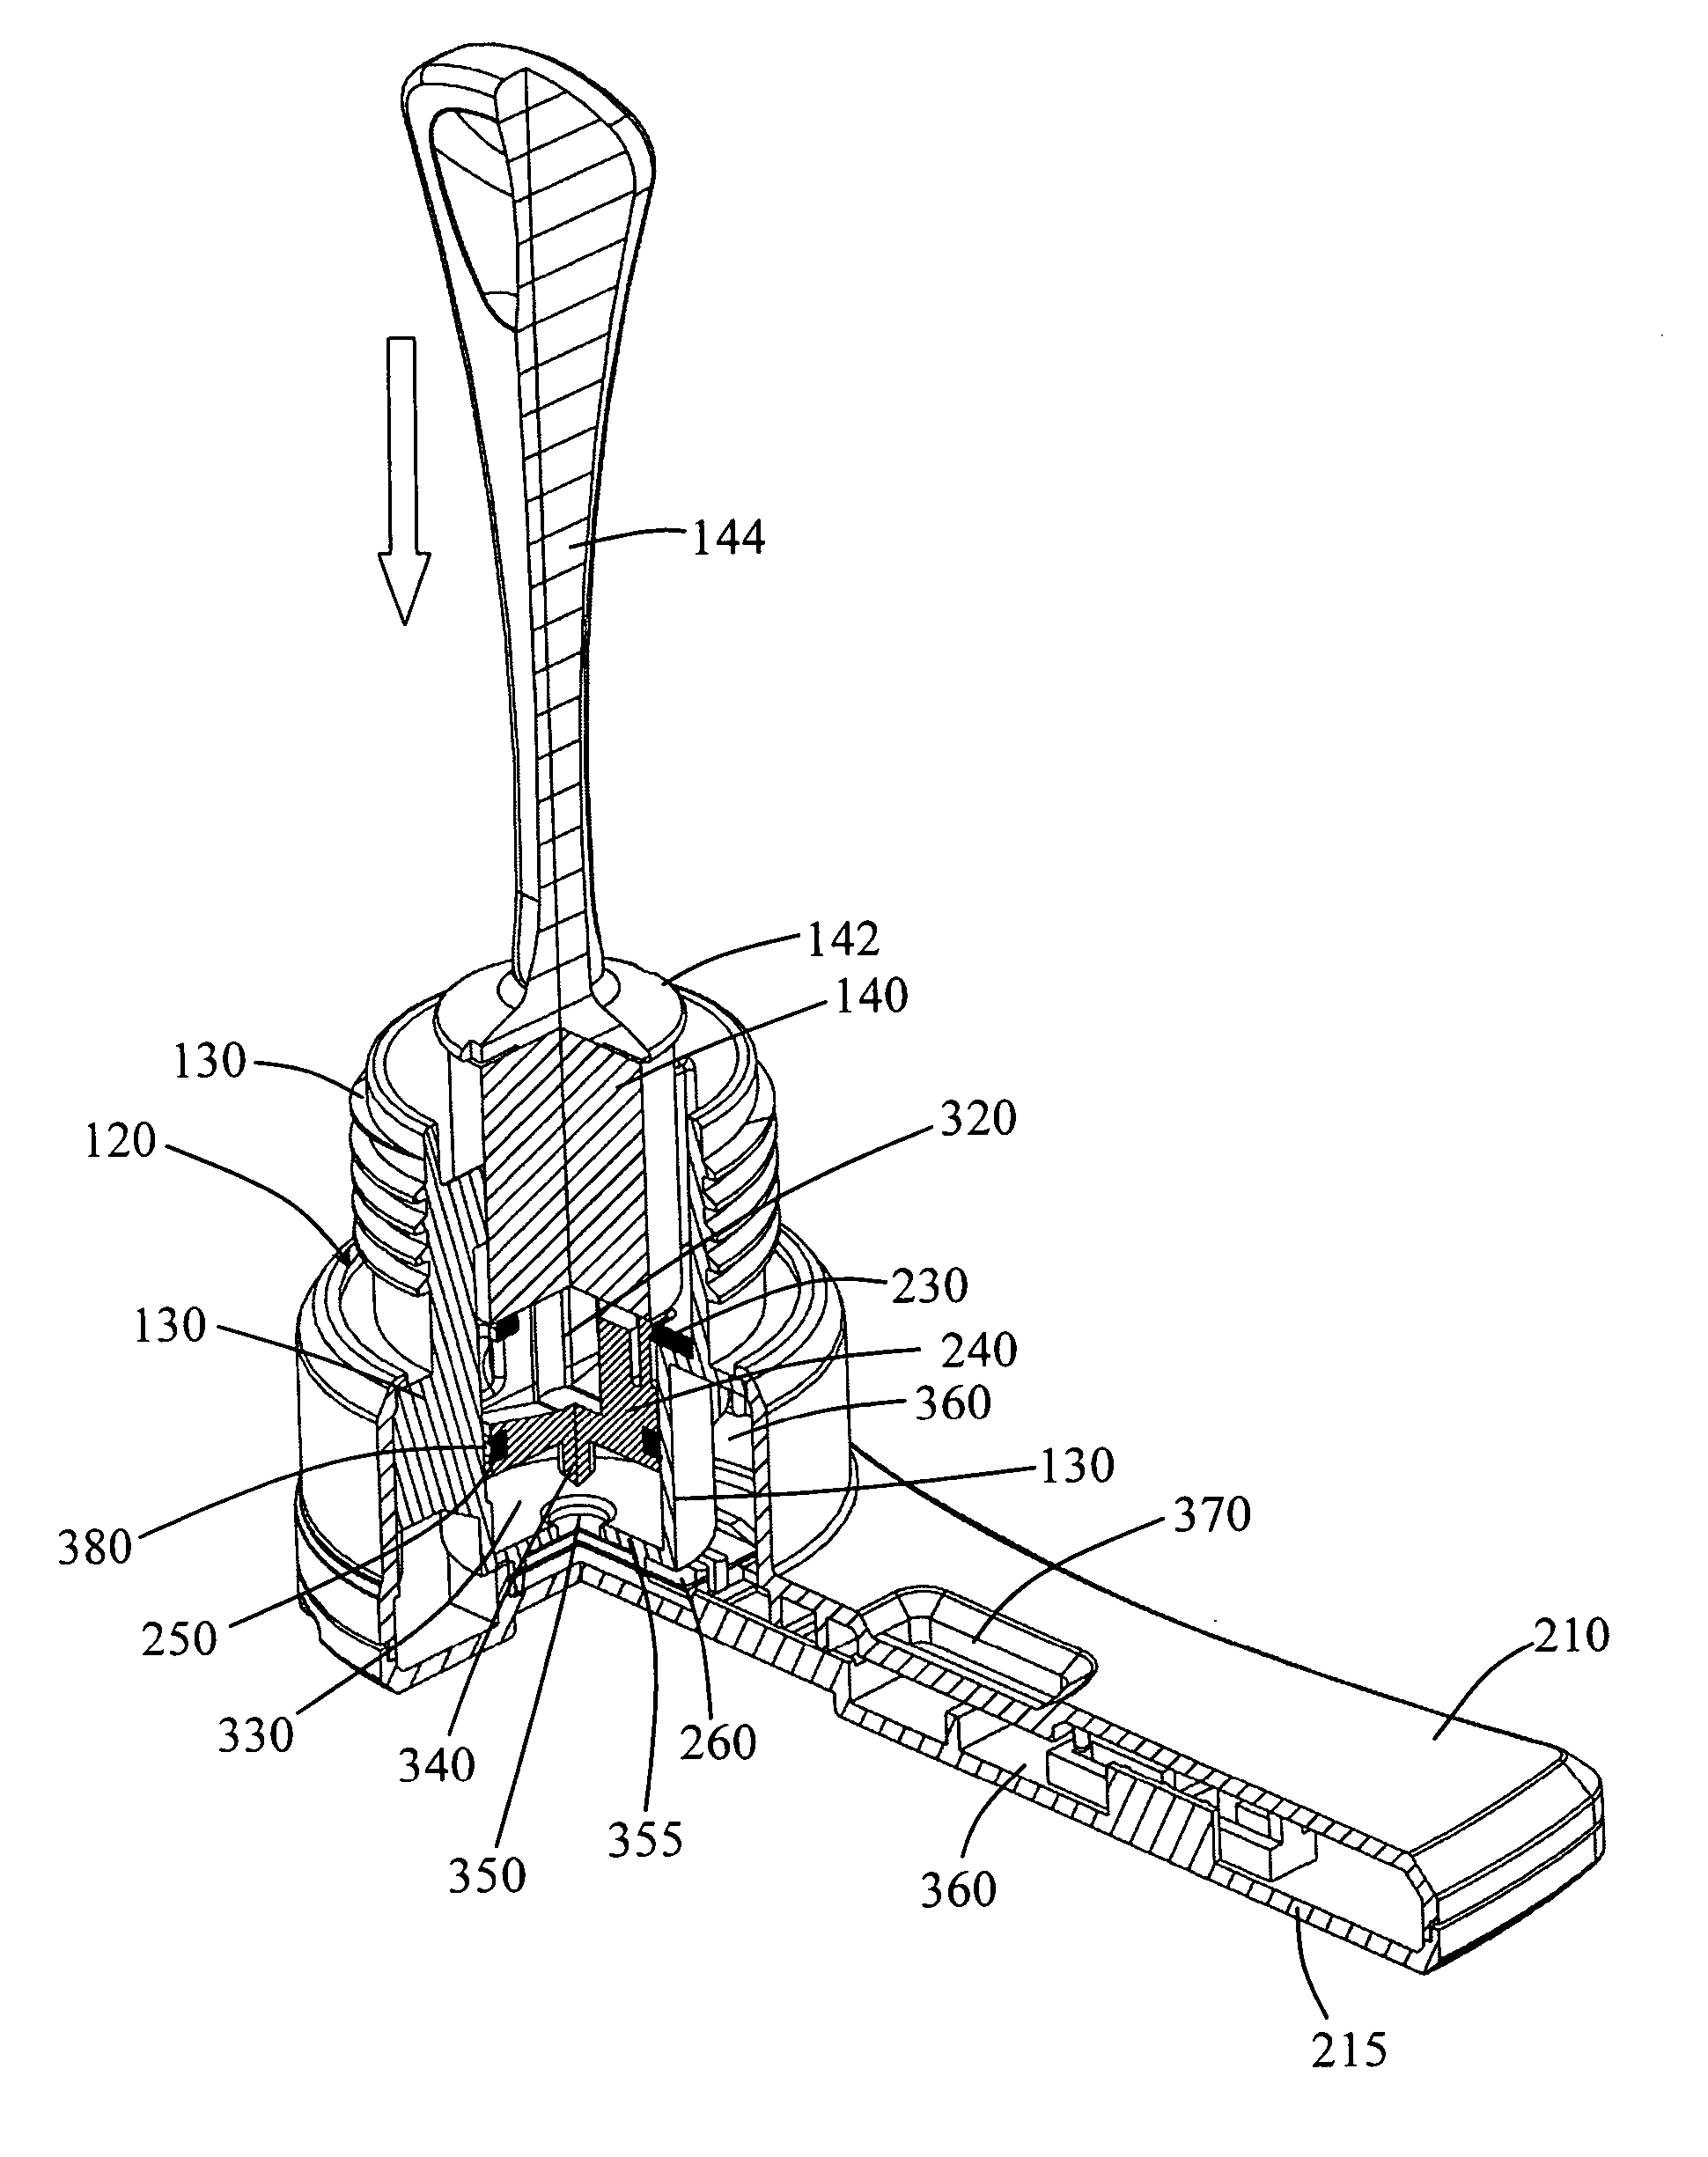 Rapid sample collection and analysis device and methods of use